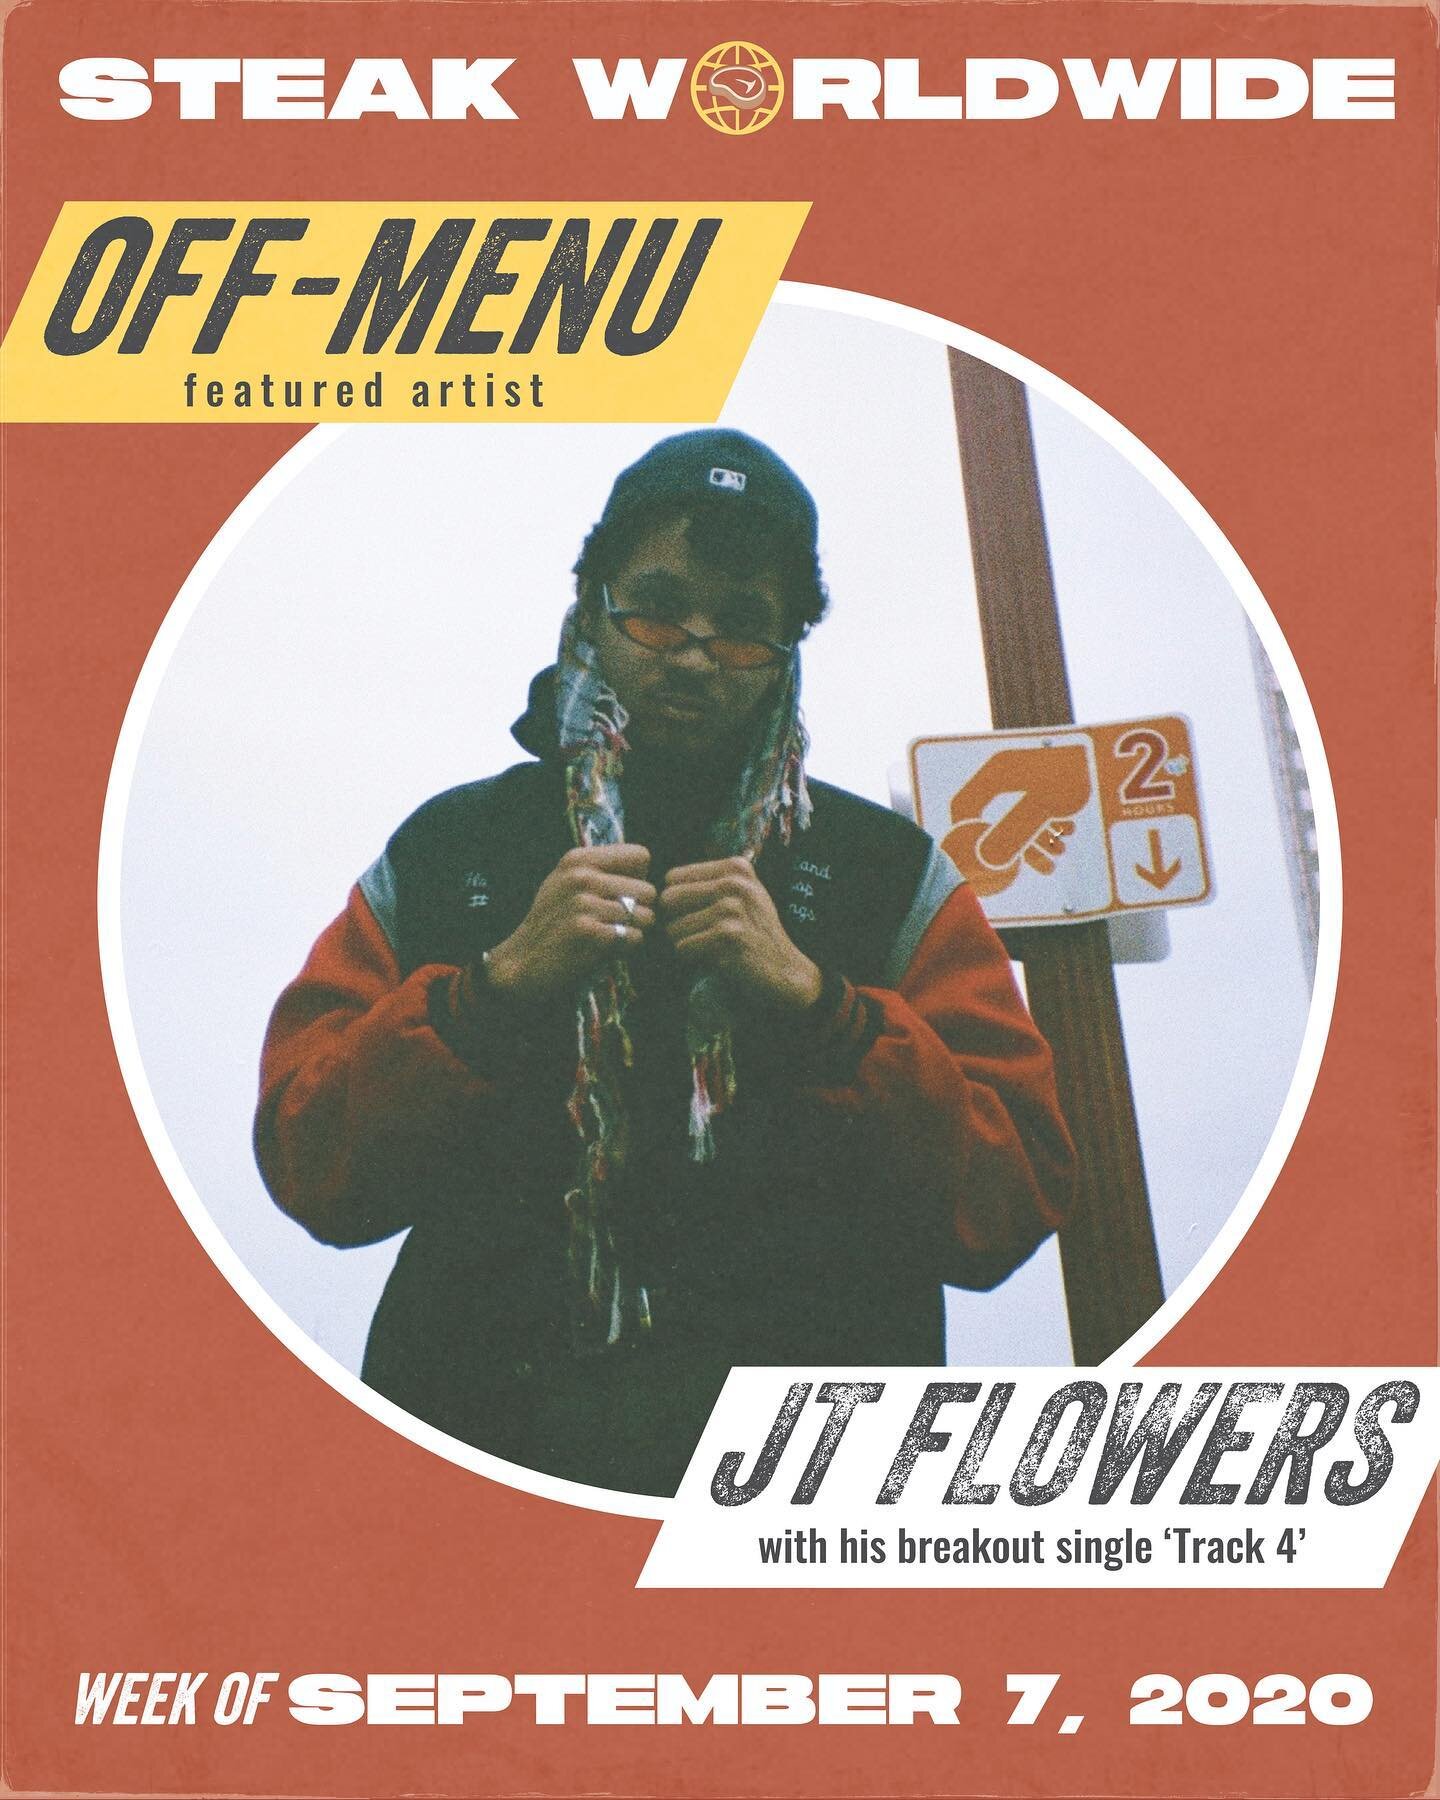 We're back with another Off Menu featured artist: JT Flowers 🙌 If you haven't listened to @jt.flowers single 'Track 4', you're missing out! Swipe to read his take on what the song is about- we'd love to hear how you guys interpret it 🔥☄️💥 Thanks J